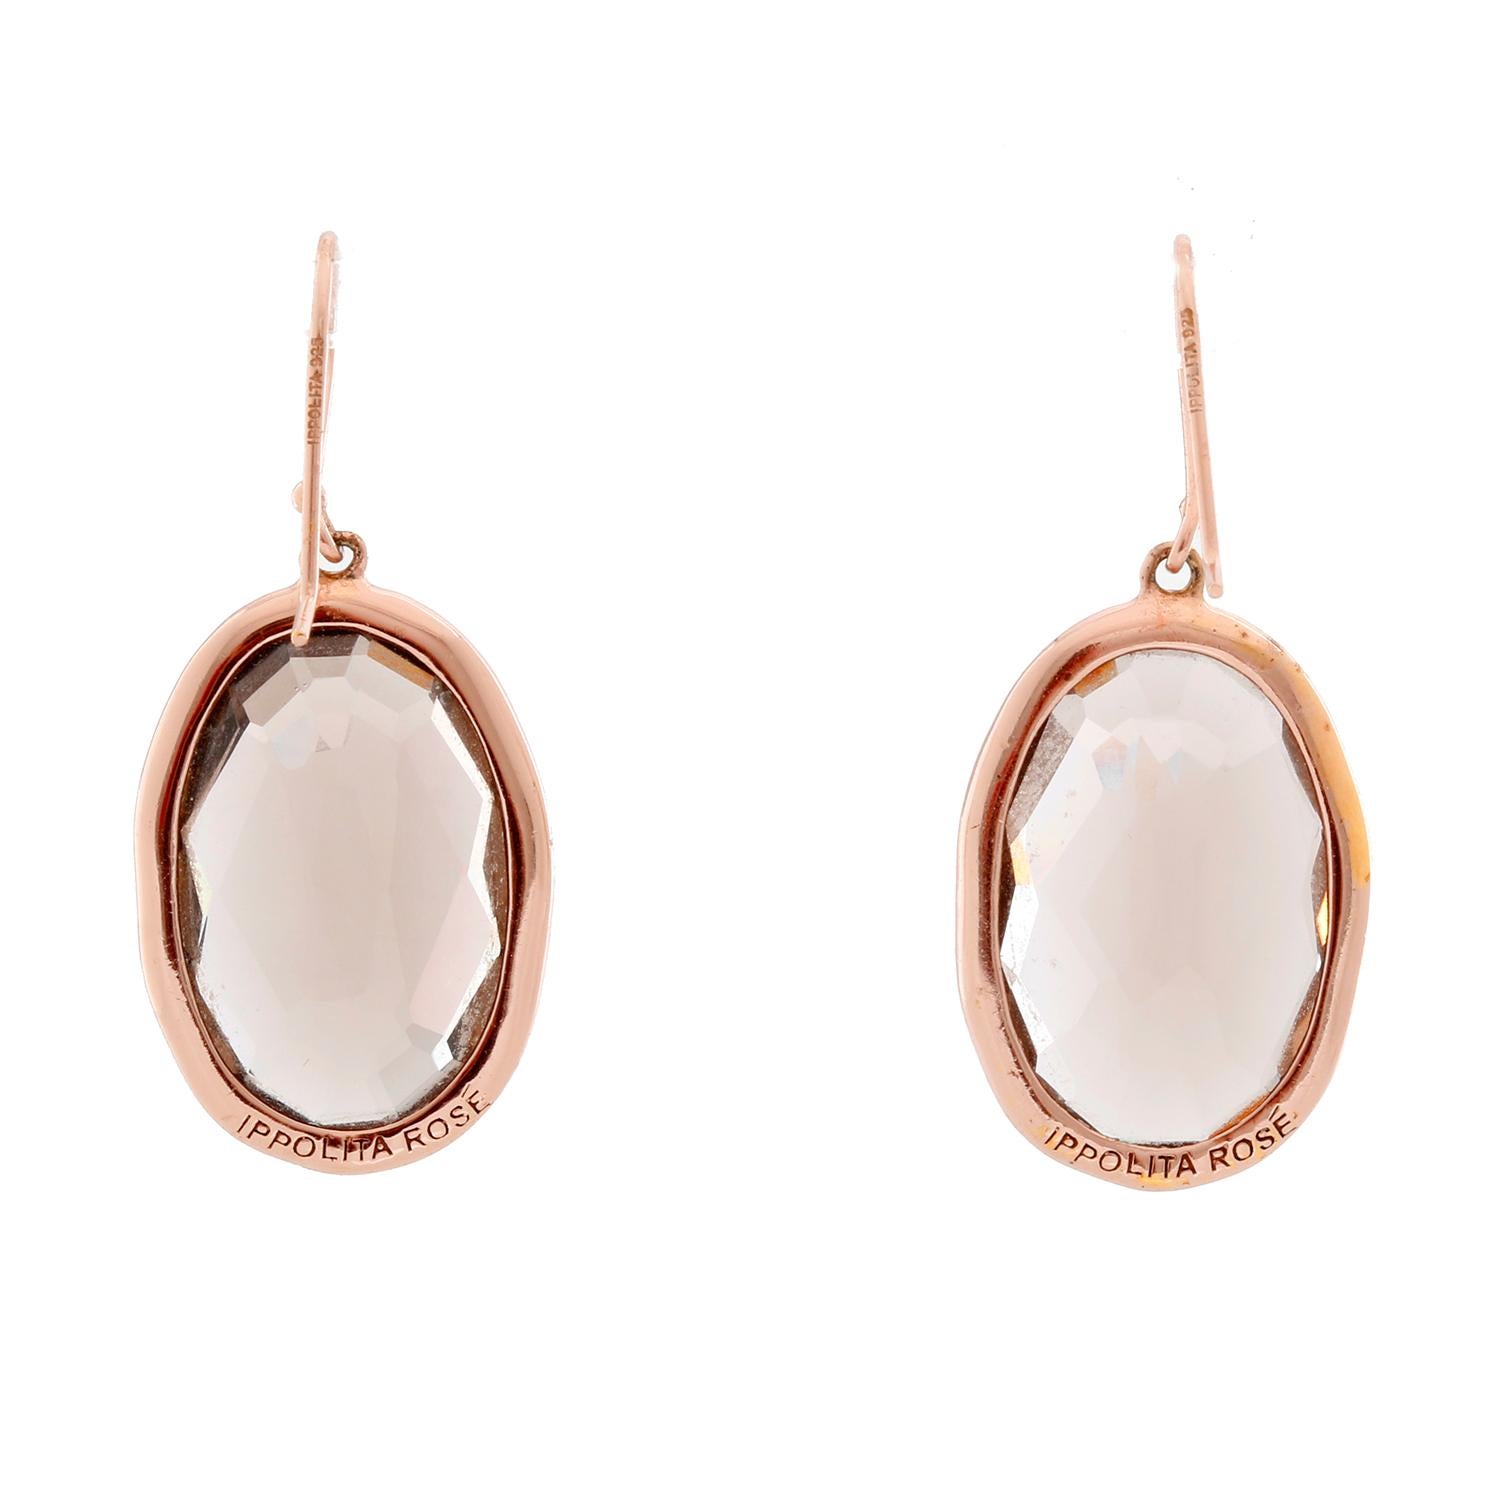 Ippolita Large Smoky Quartz Tear Drop Earrings  -  These are the large size and they go with everything. It’s like they pick up the color of what you wear. Set in Rose gold they are 1